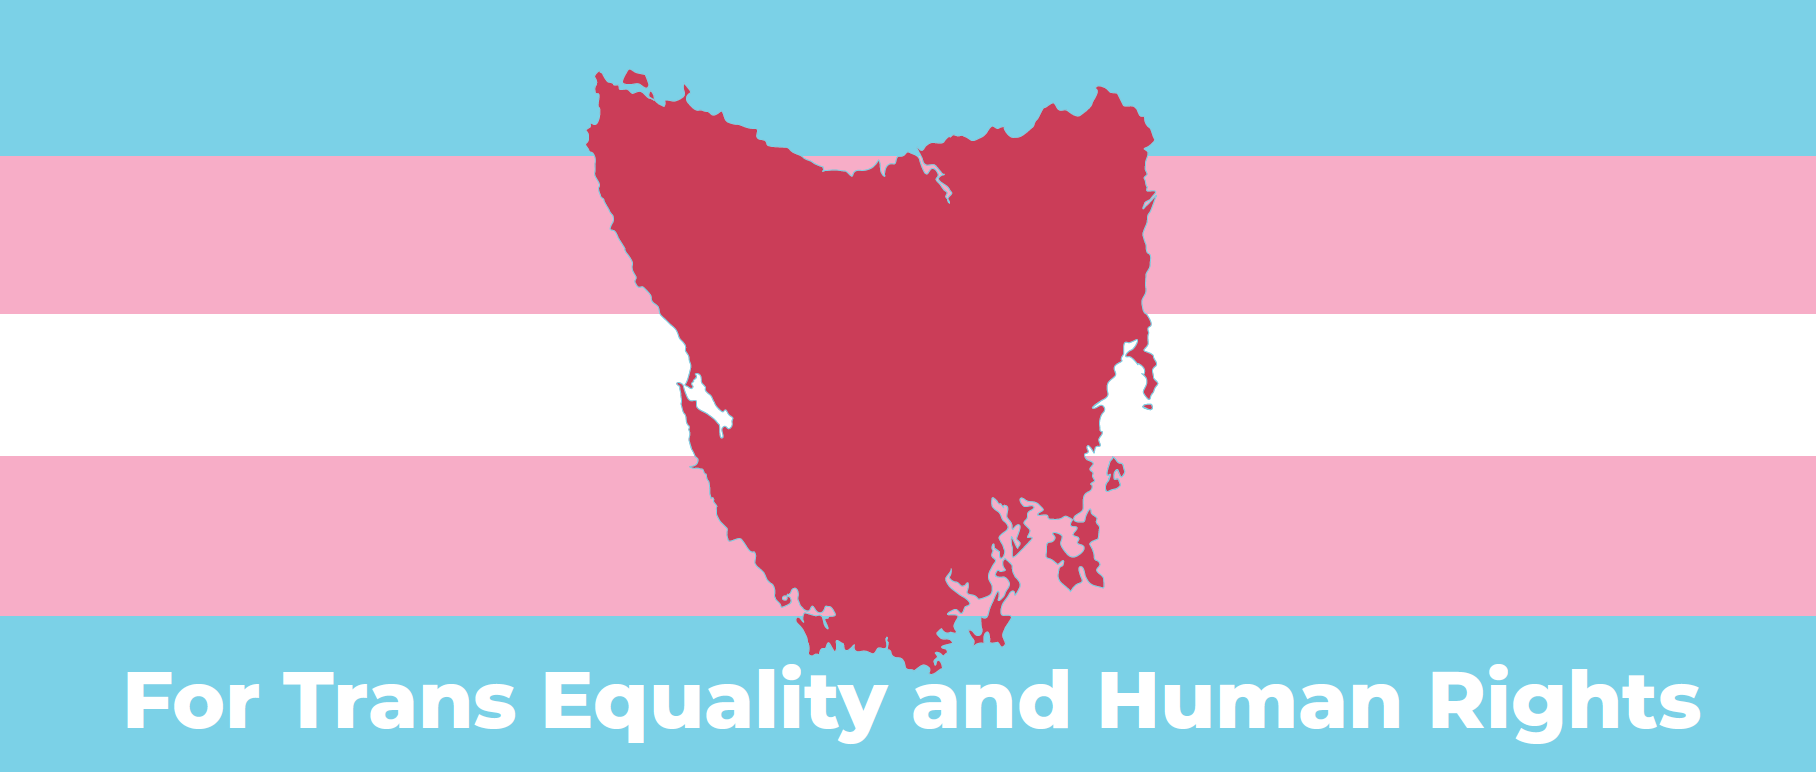 For Trans Equality and Human Rights